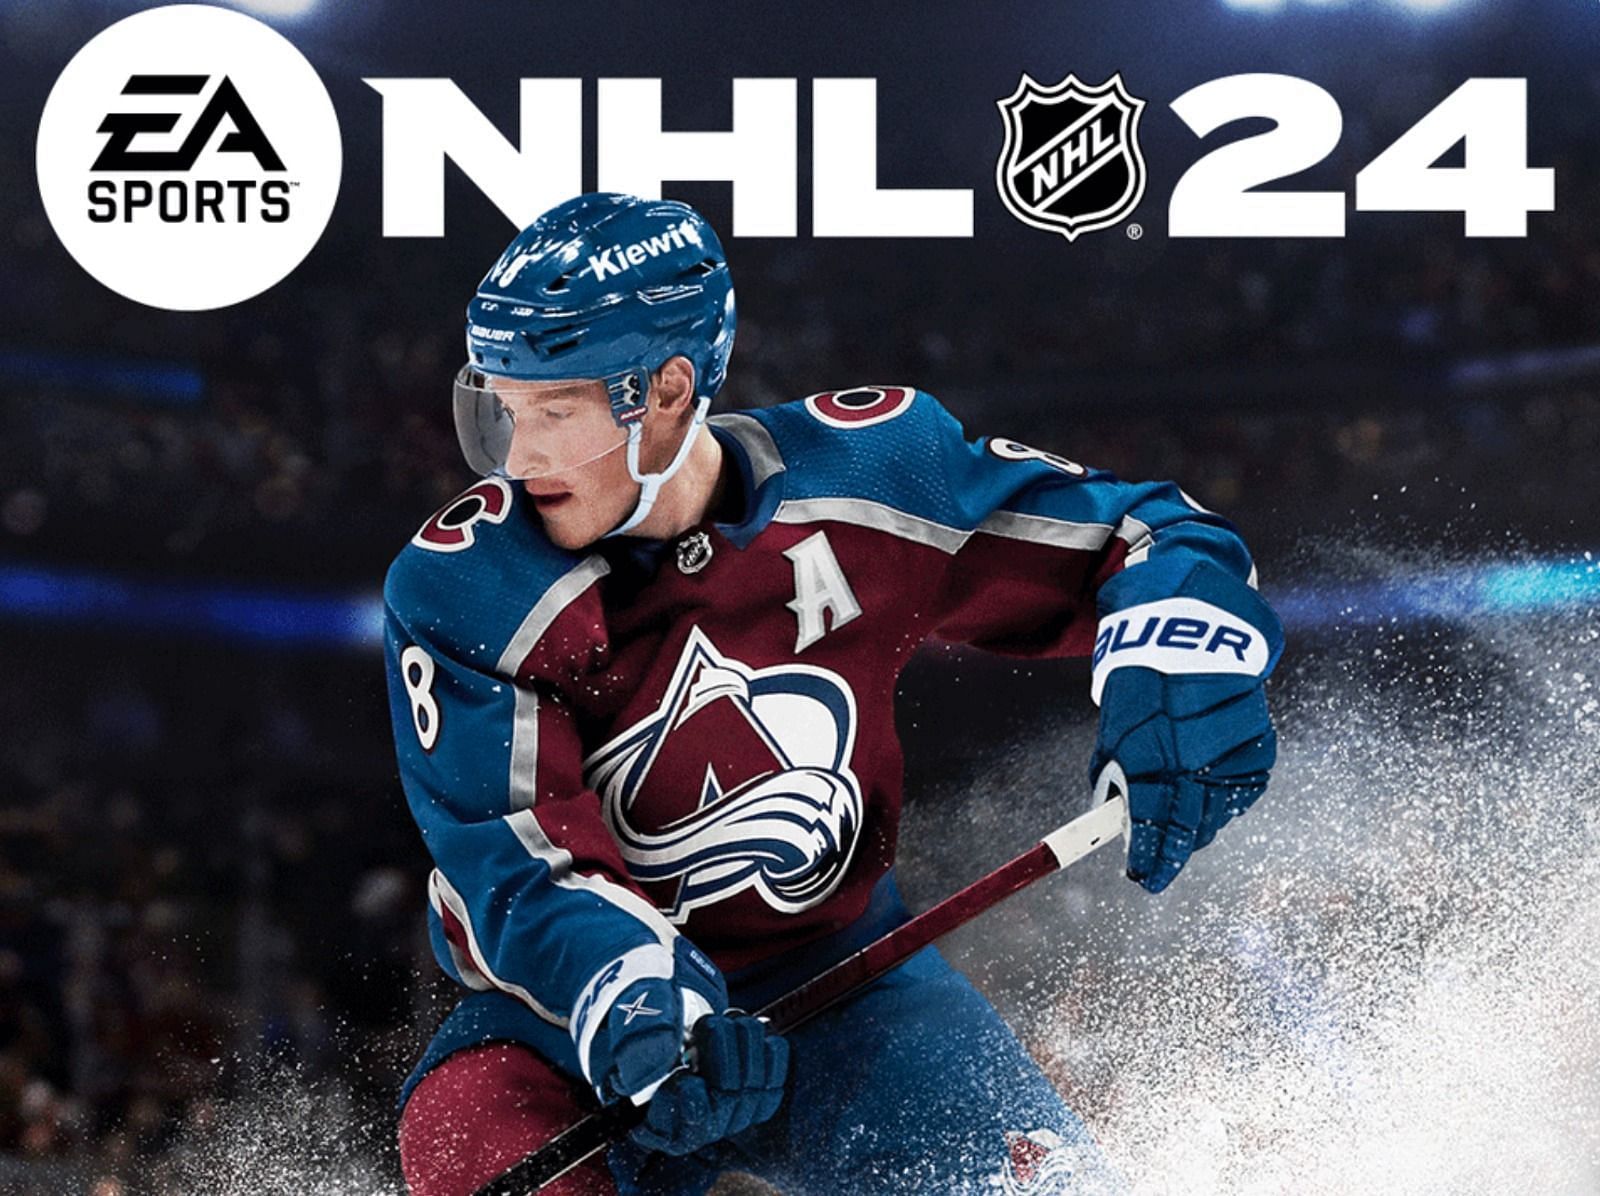 NHL 24 Rumors revealed: order details, release date and more